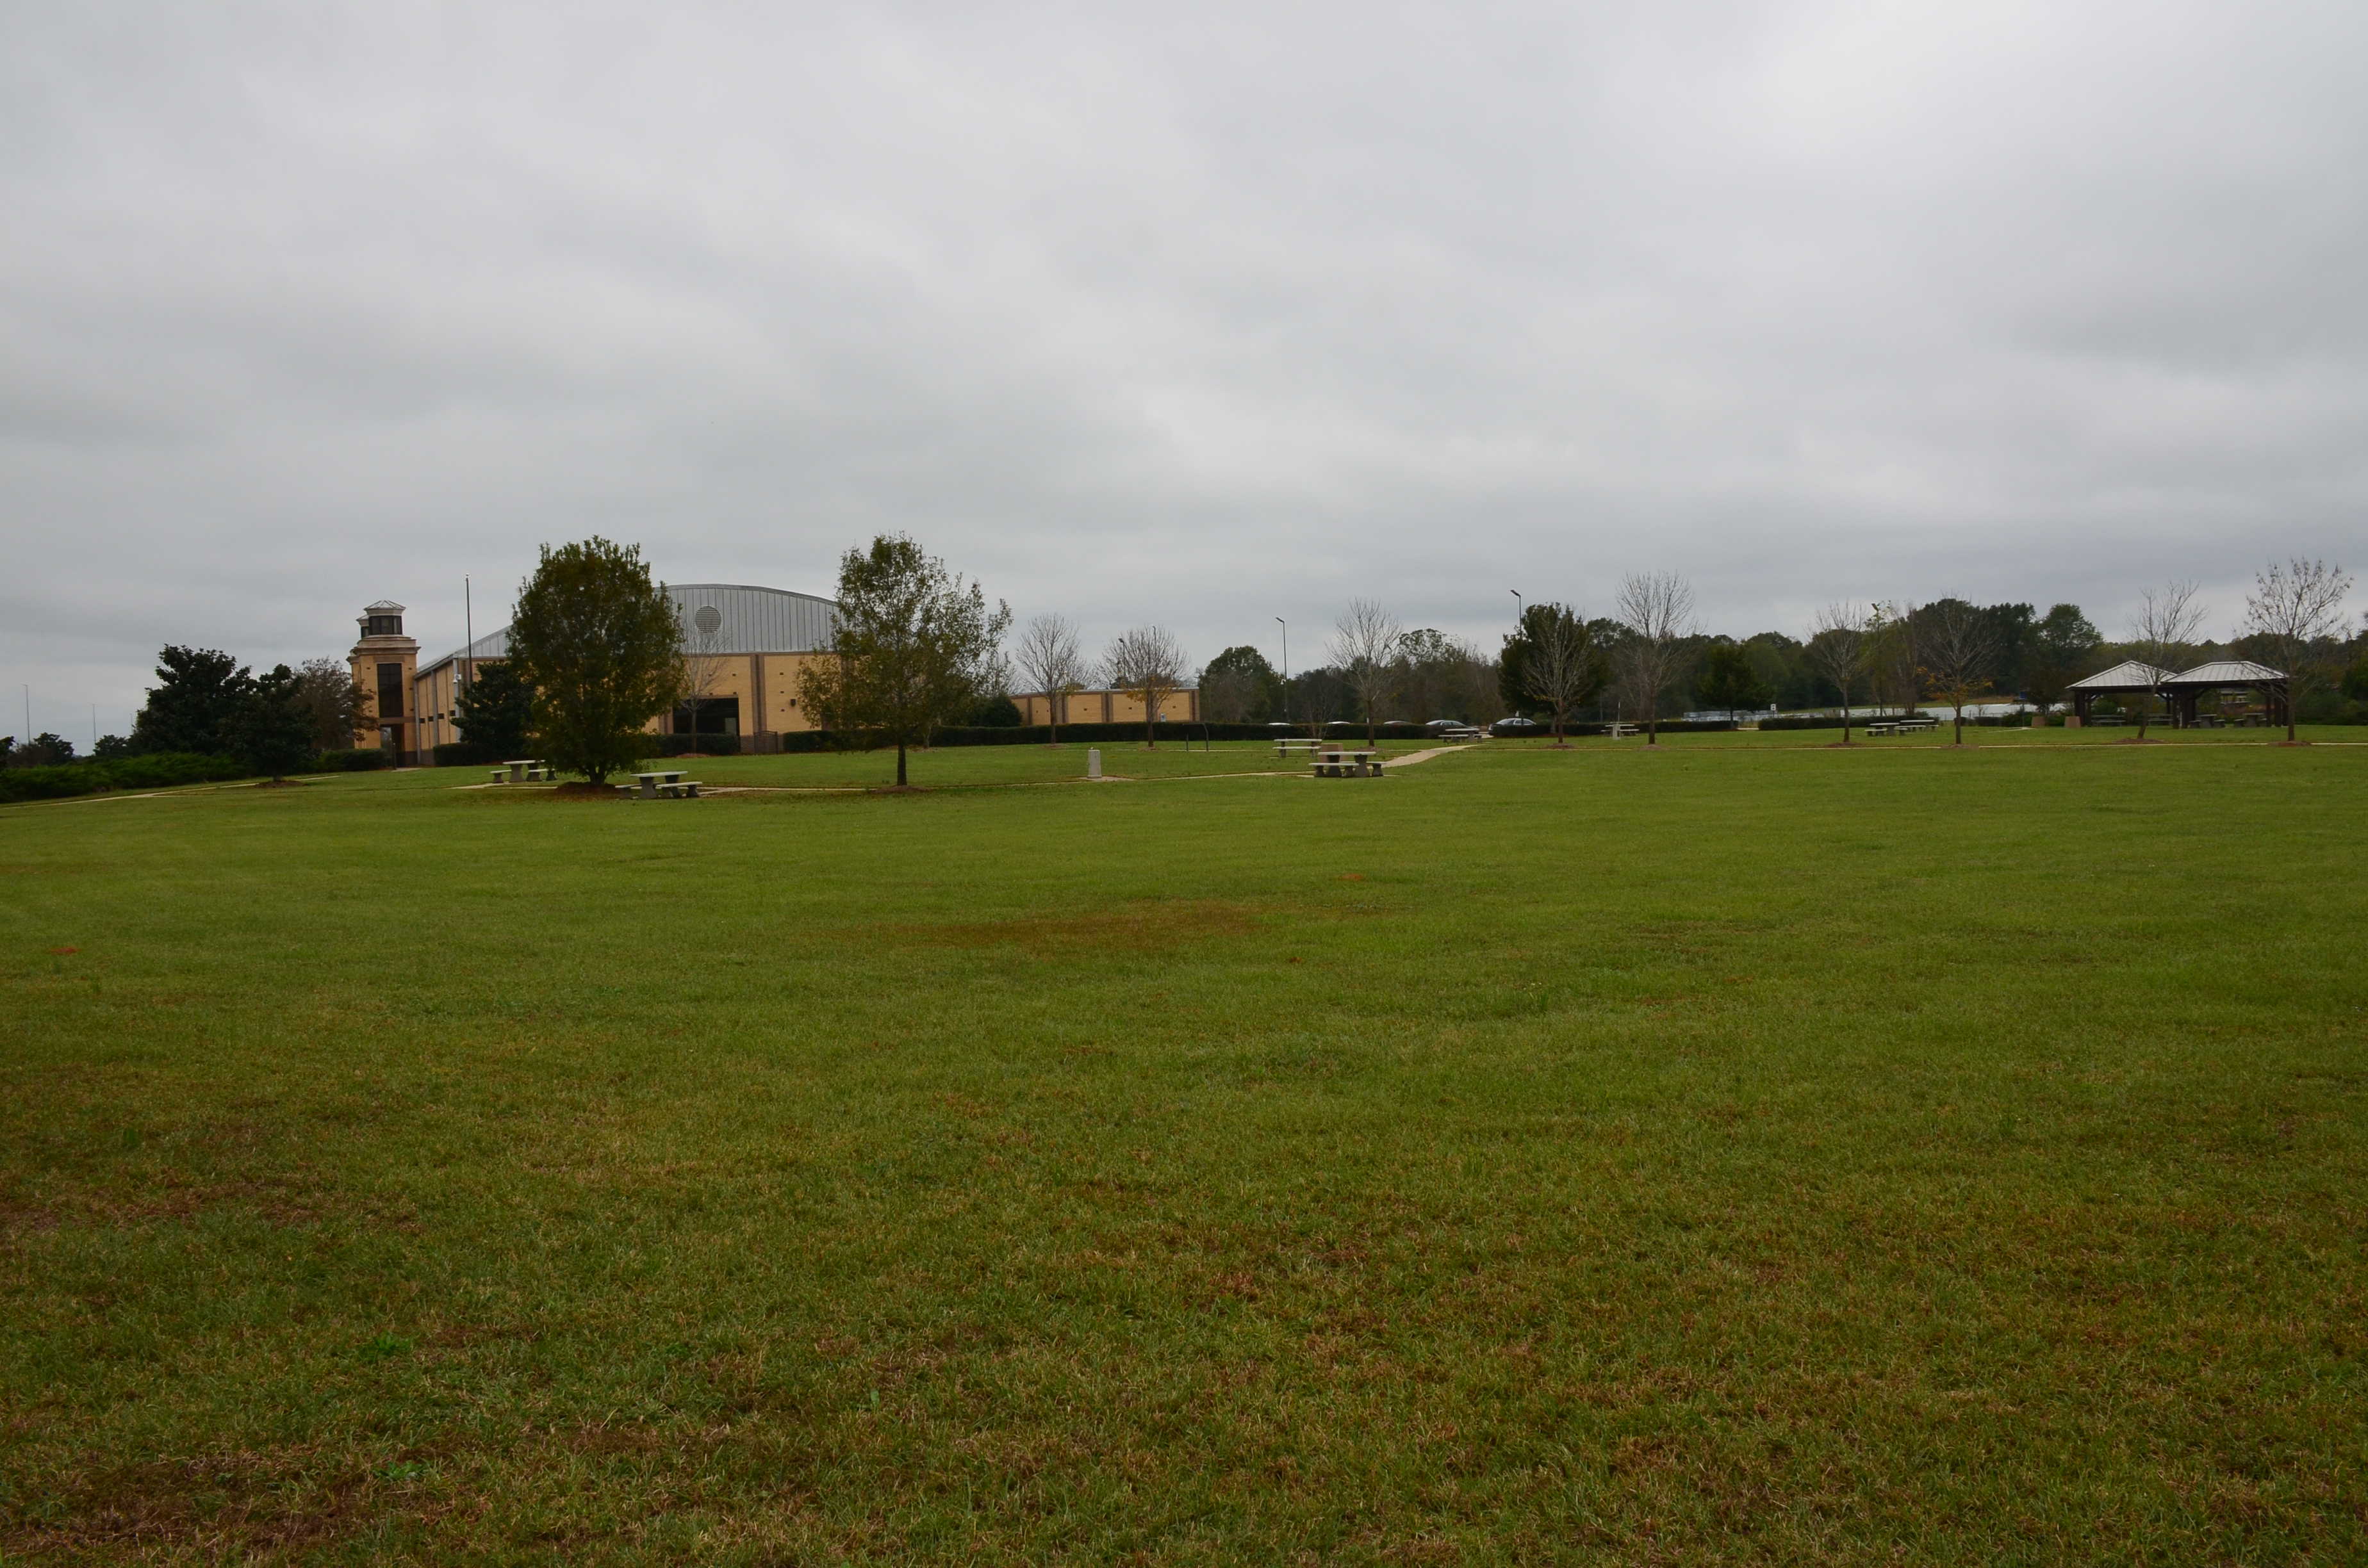 Site of tent city at the Lowndes Interpretive Center on the Selma to Montgomery National Historic Trail in Alabama